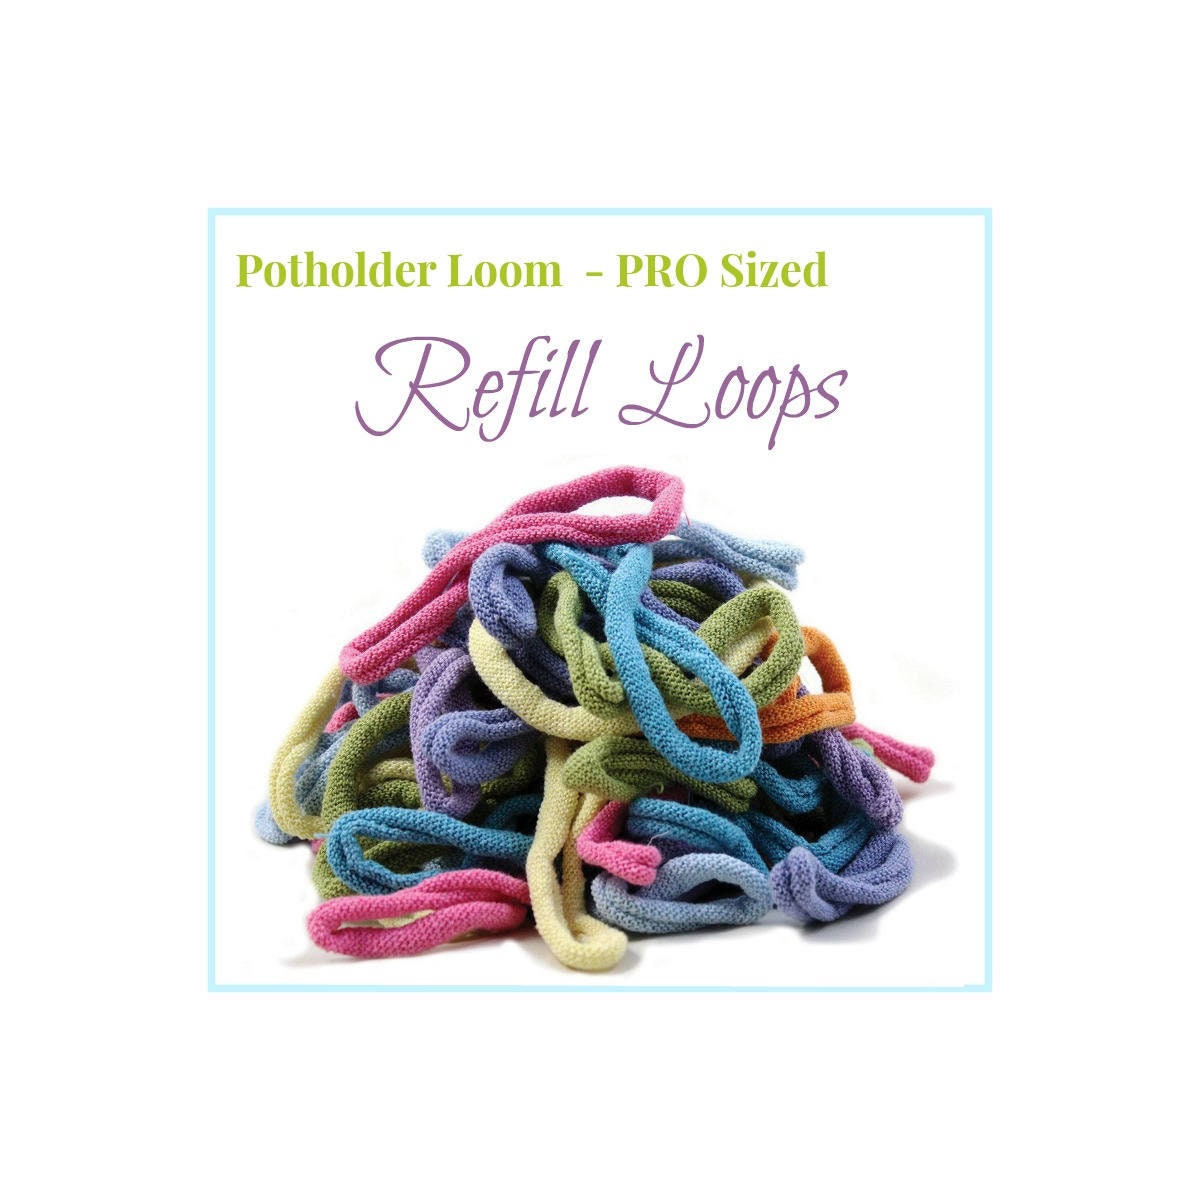 PRO™ Potholder Loop Refill for Harrisville Designs' PRO Potholder Loom,  Individual Colors, Set of 27 Cotton Loops Your Choice From 34 Colors 